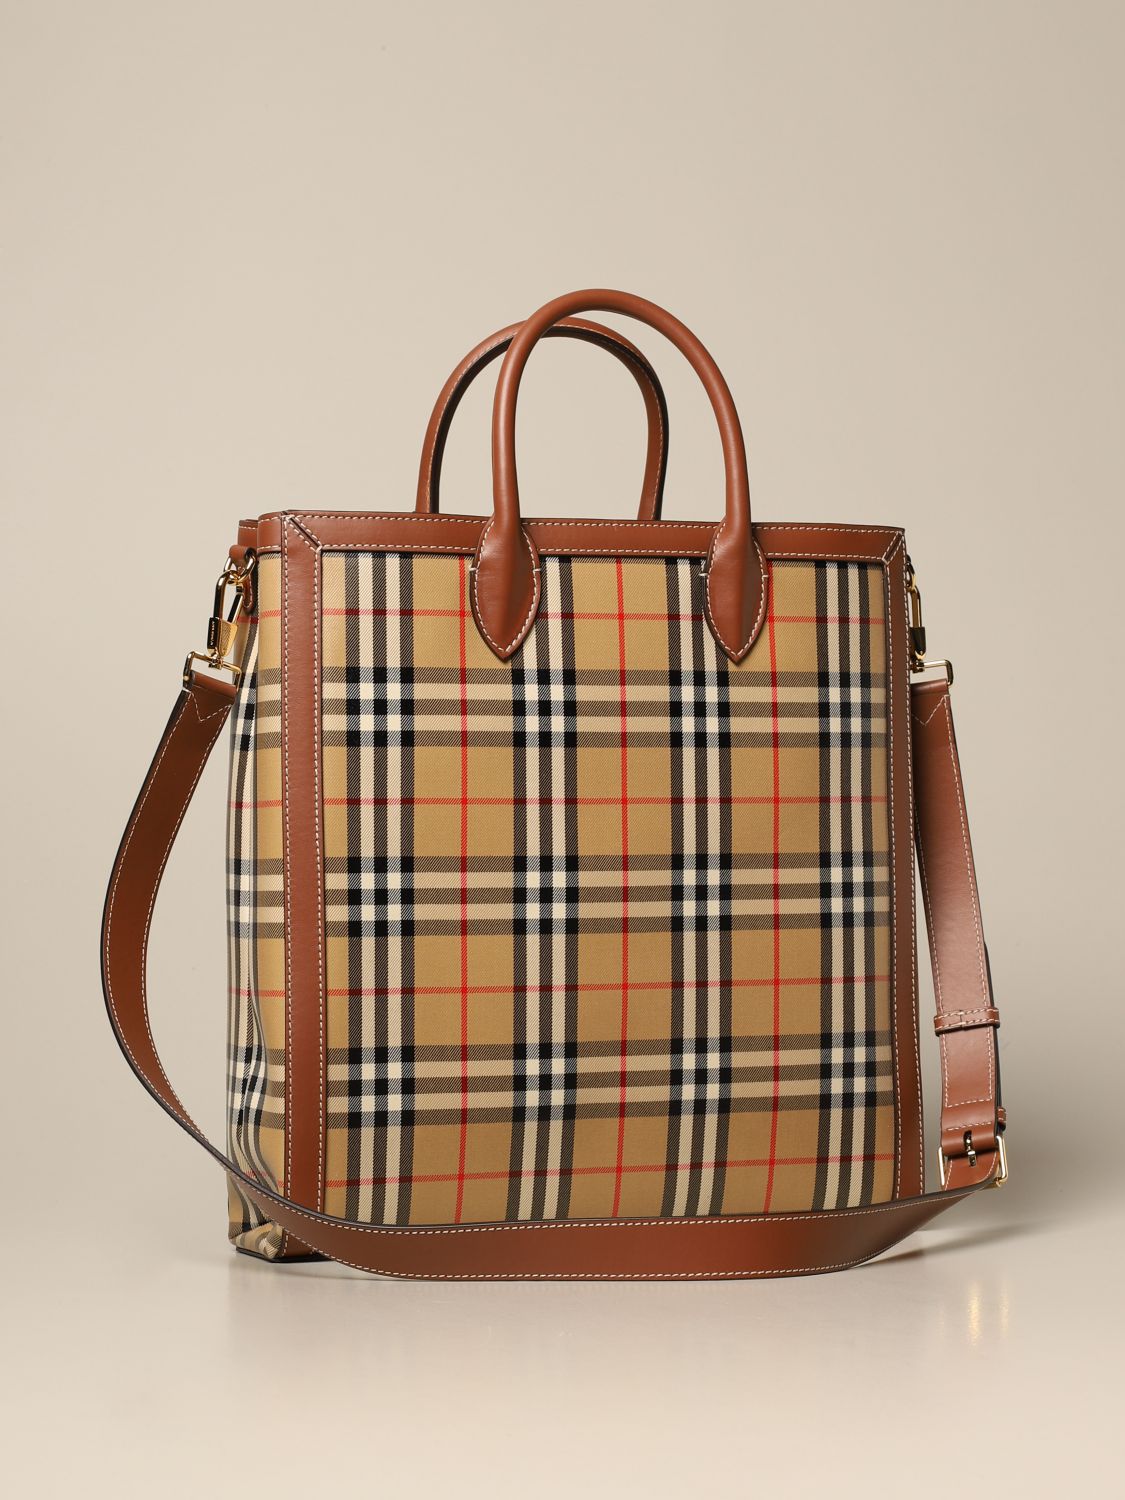 Burberry Kane bag in coated canvas with check pattern | Shoulder Bag